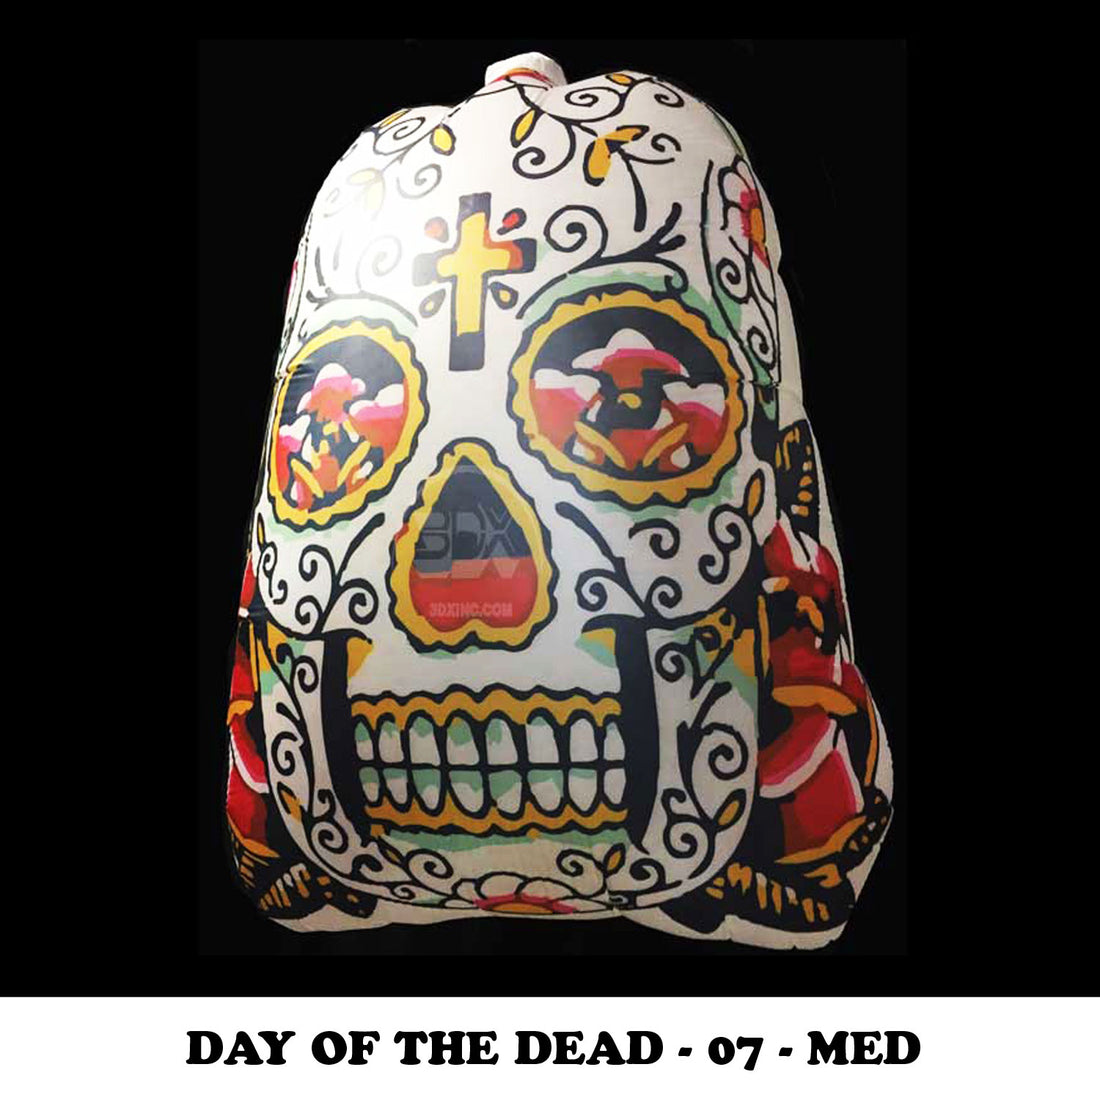 DAY OF THE DEAD - 07 - MED